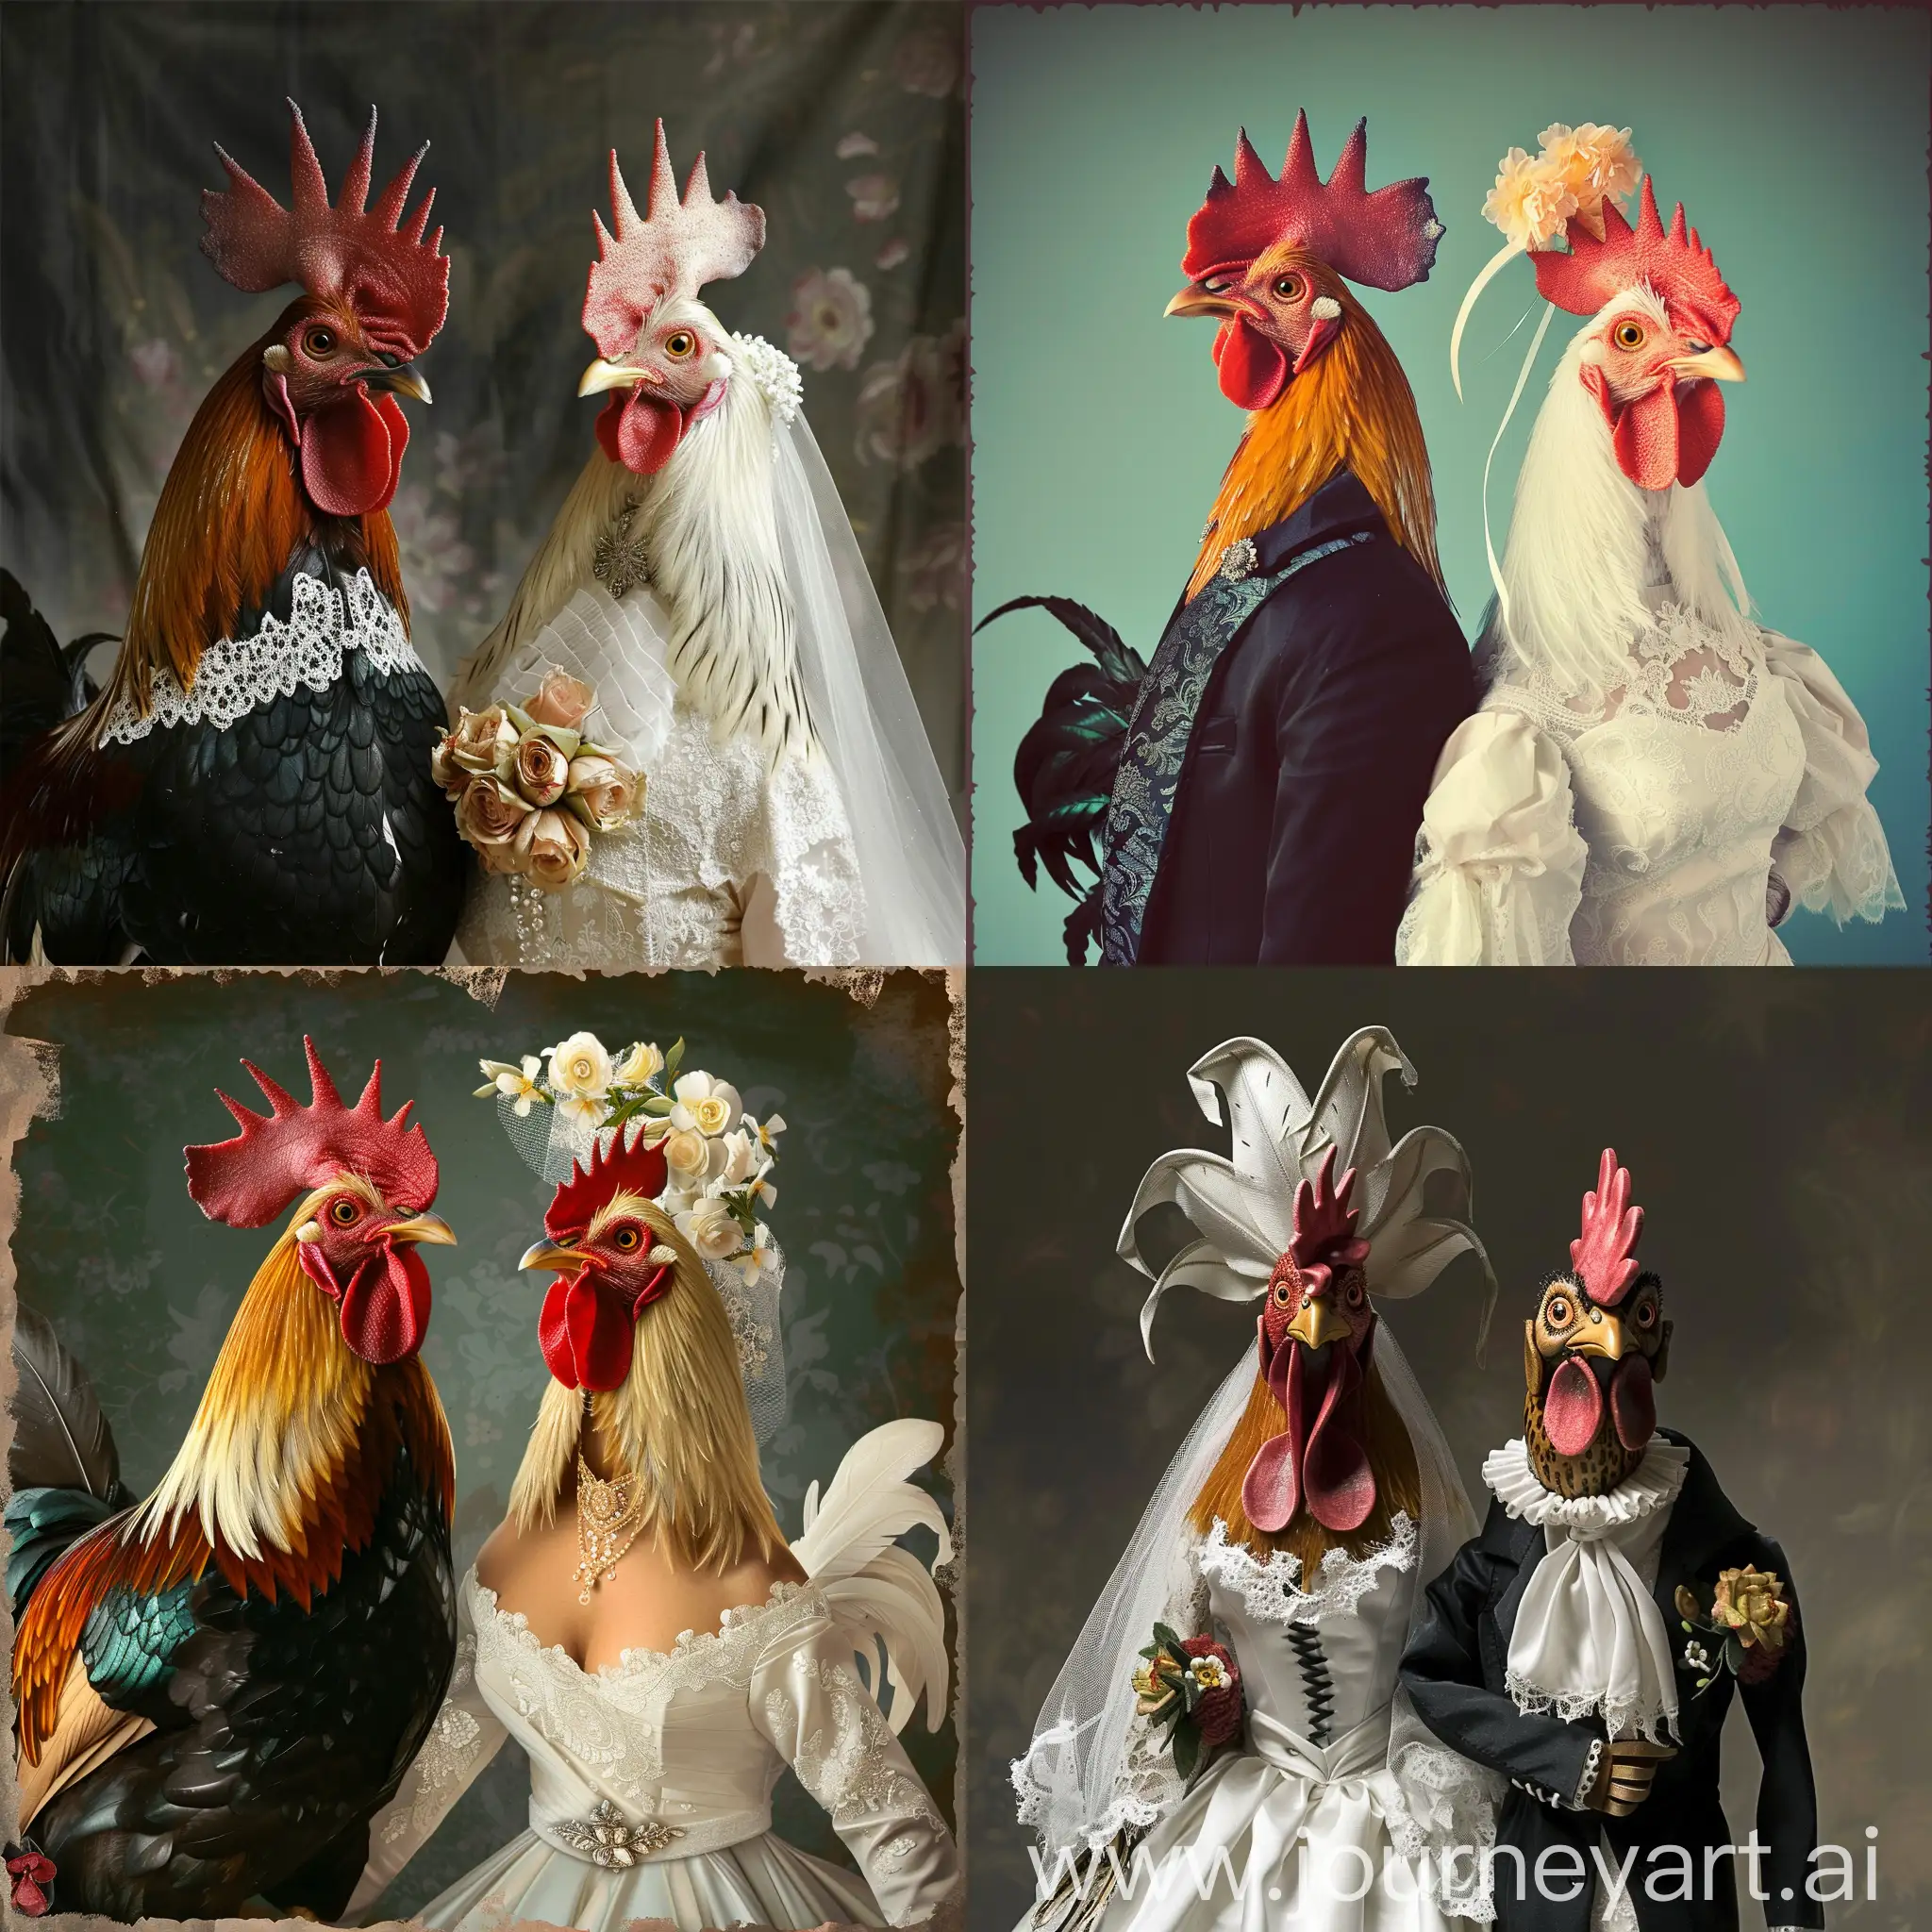 Rooster-and-Hen-Wedding-Portrait-in-Human-Attire